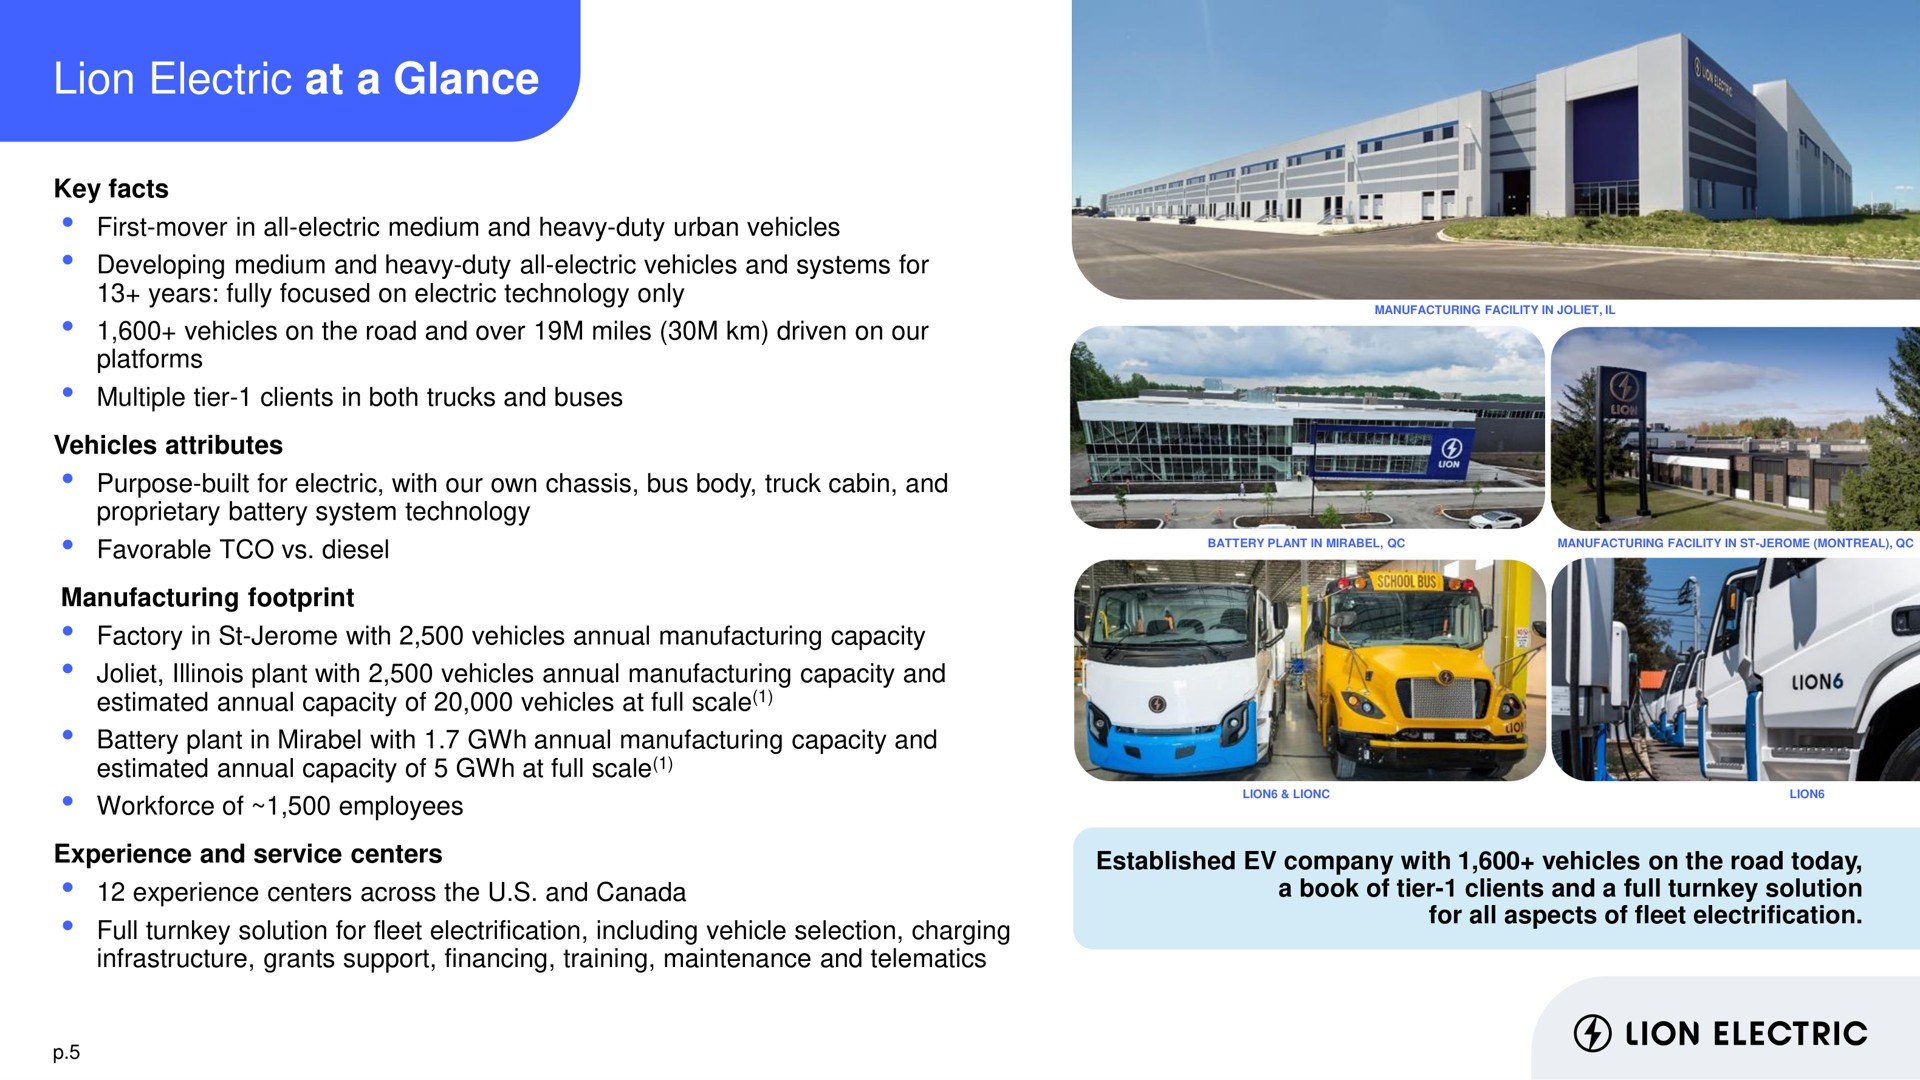 lion electric at a glance estimated annual capacity of vehicles full scale estimated annual capacity of full scale | Lion Electric